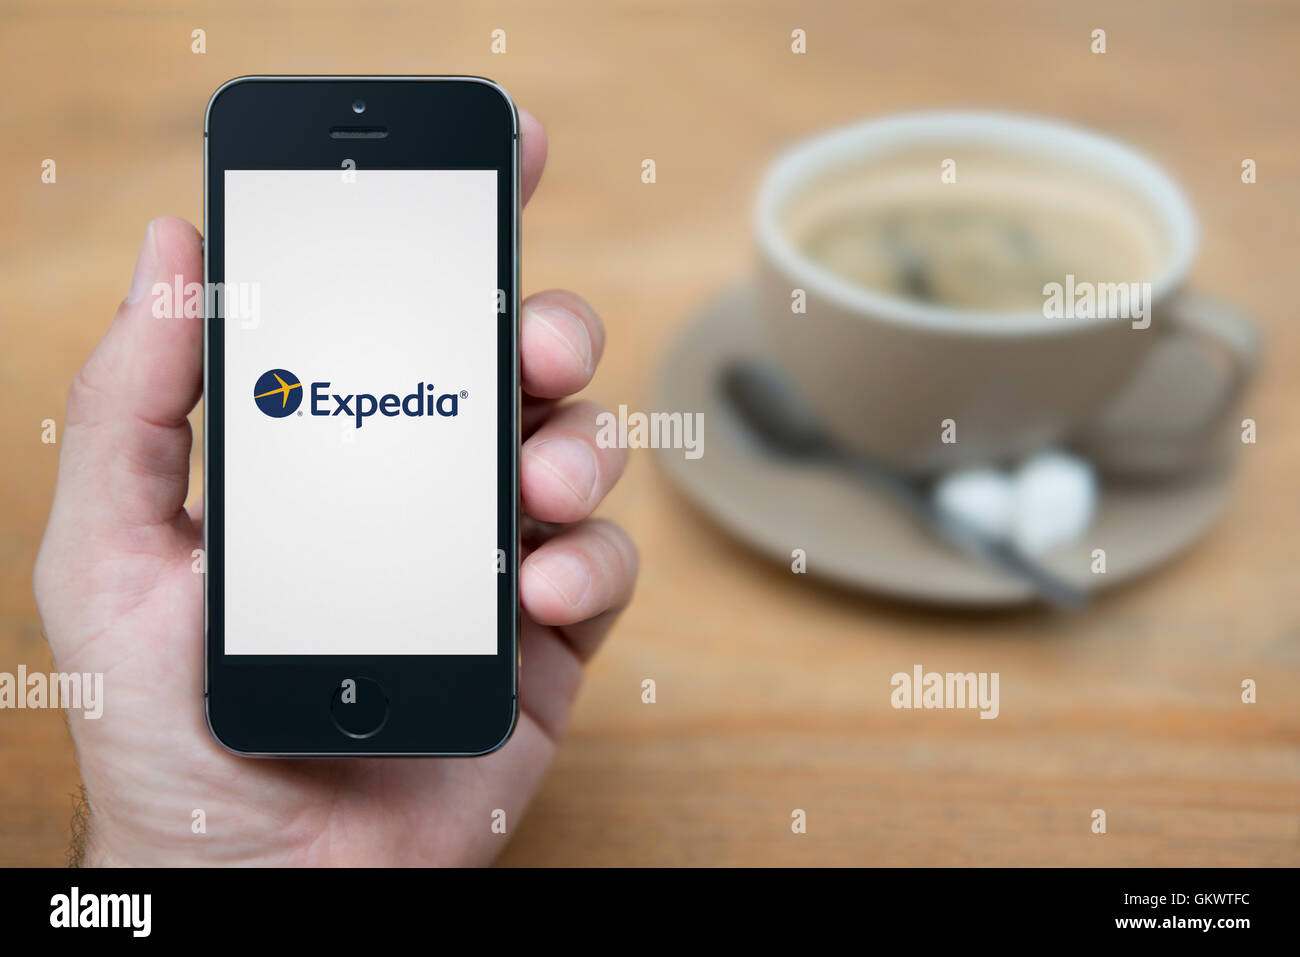 A man looks at his iPhone which displays the Expedia logo, while sat with a cup of coffee (Editorial use only). Stock Photo